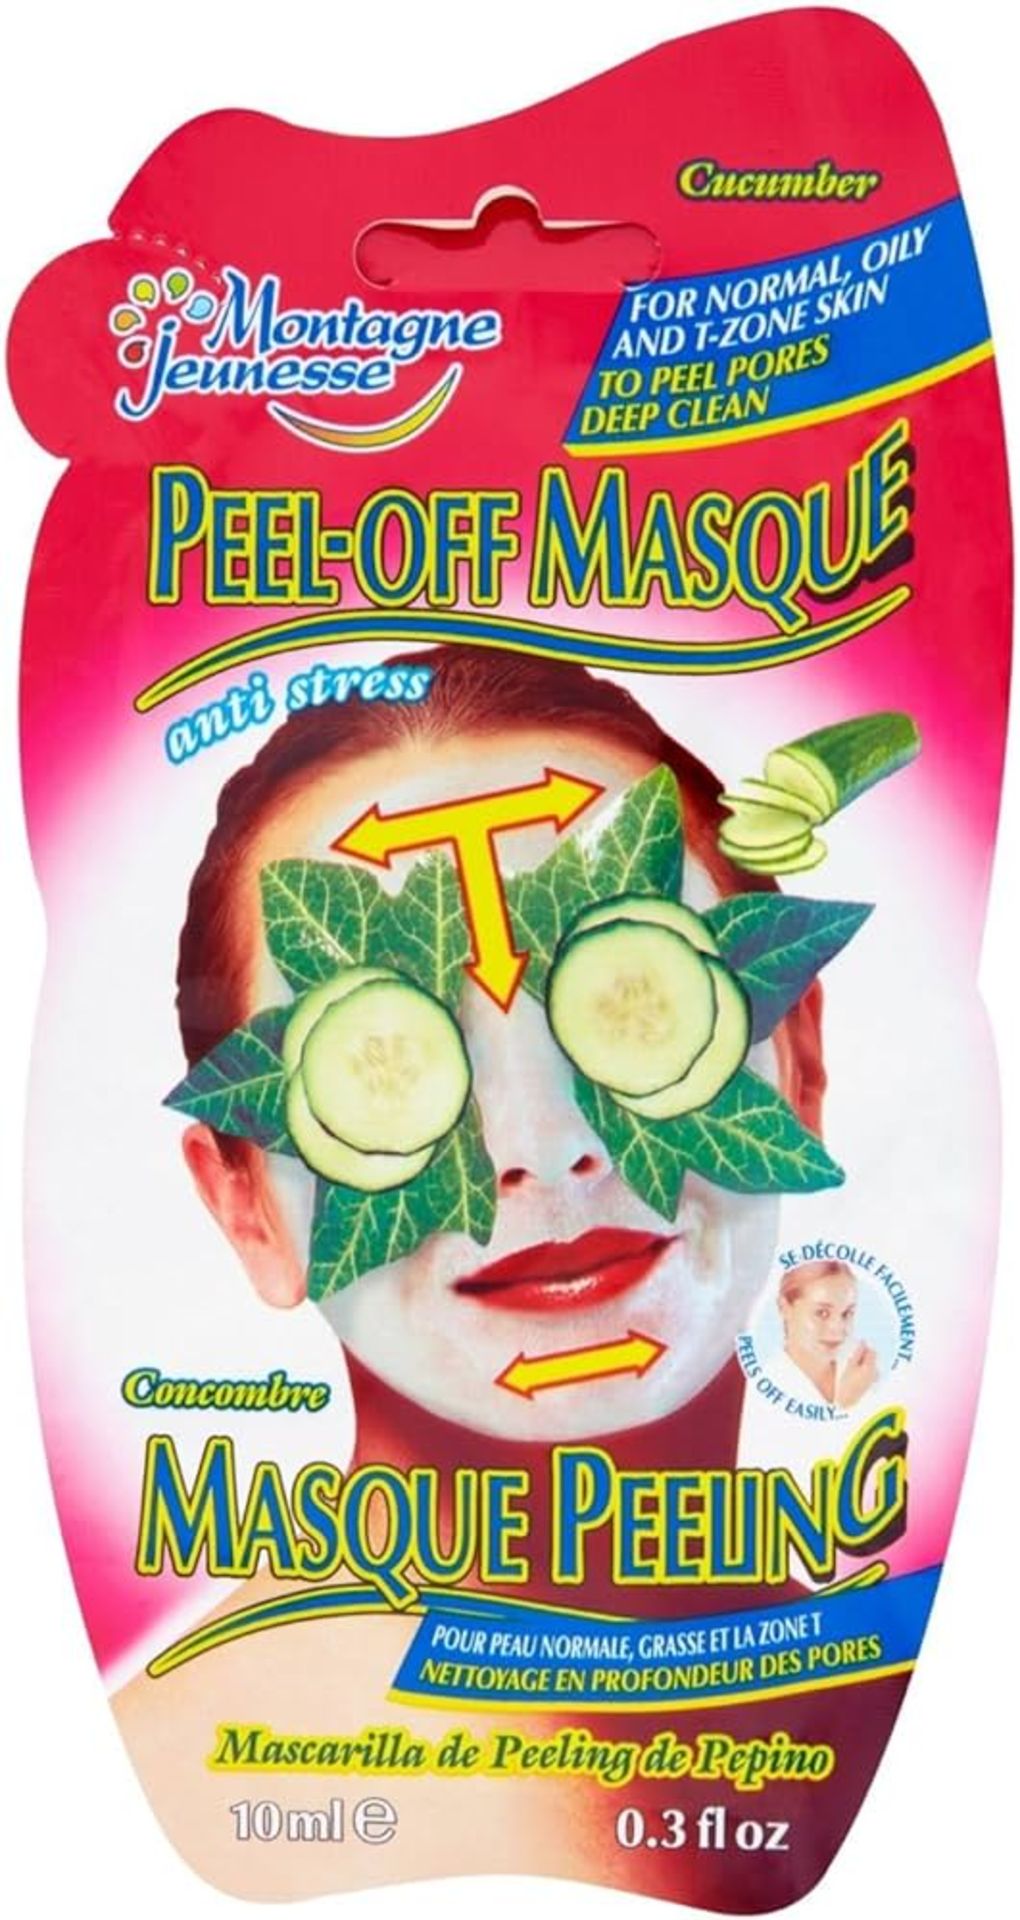 Bulk Trade Lot 200 x Montagne Jeunesse Face Masks. RRPs Vary from £2.50 - £6. This lot has a RRP - Image 15 of 16